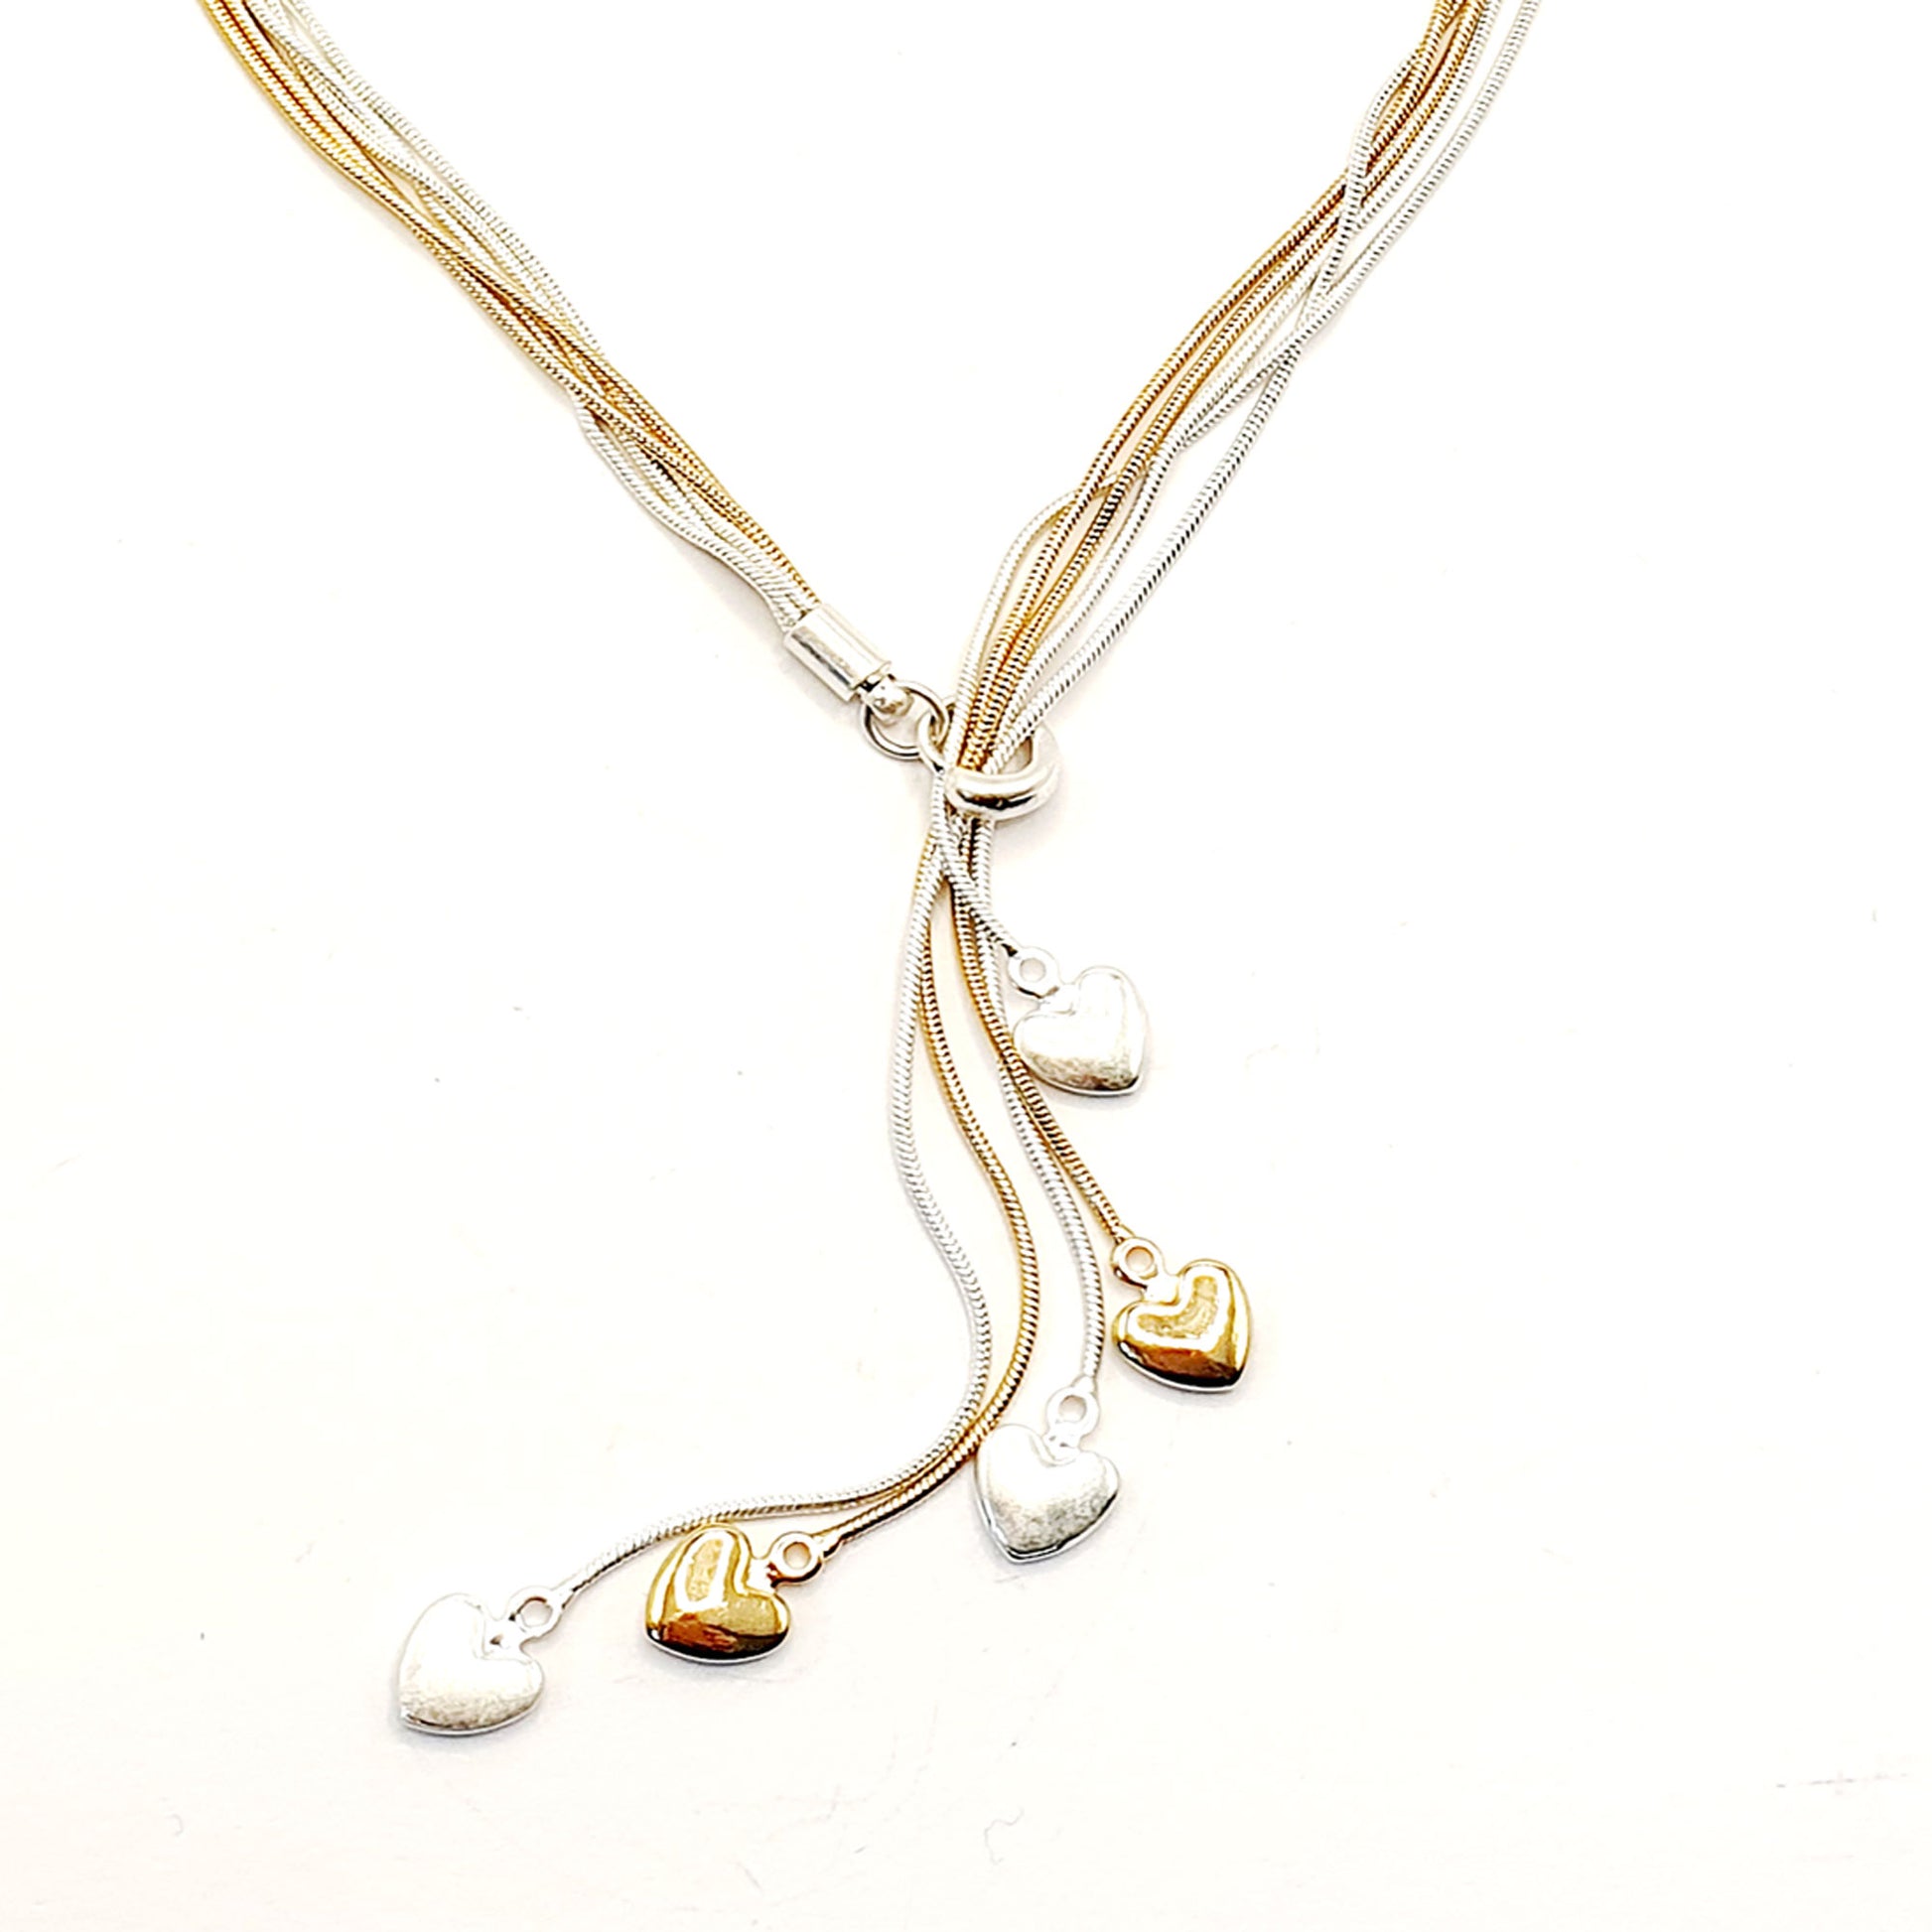 Five strands of silver and gold plated chains with heart charms.